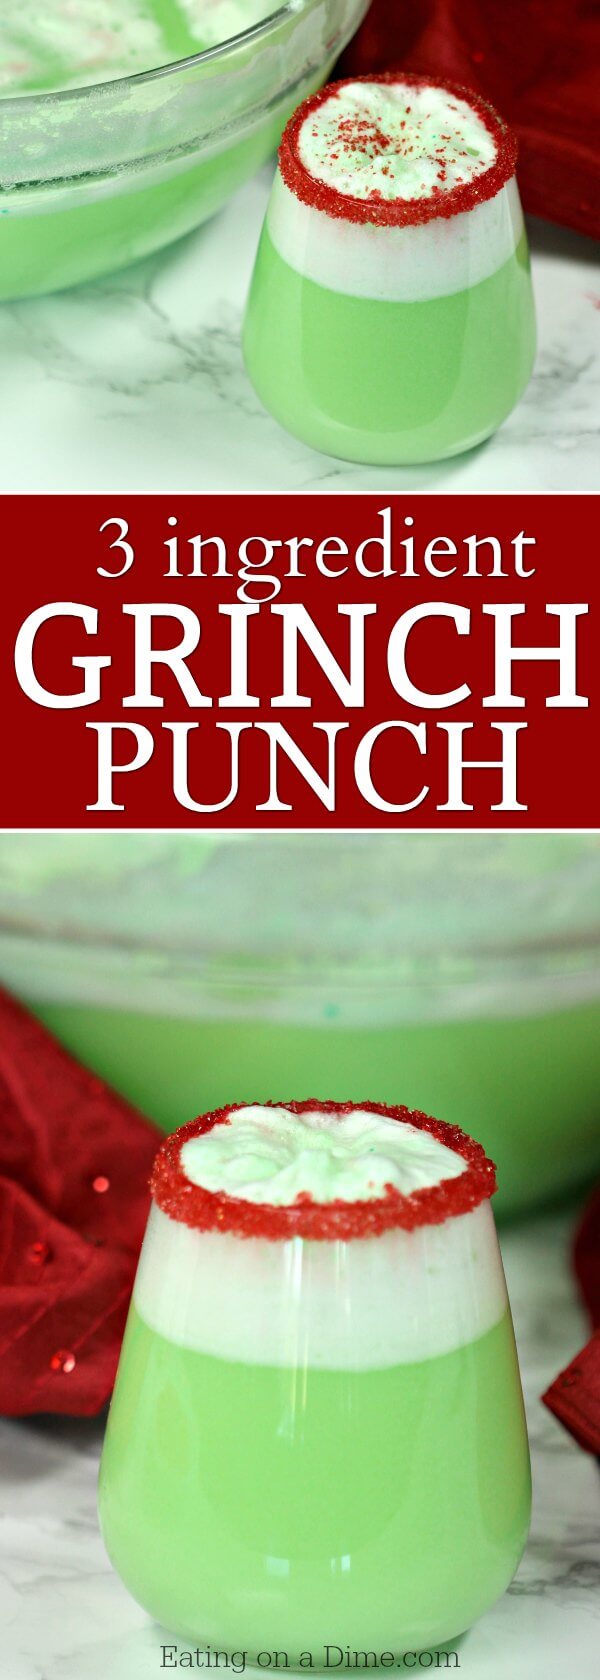 The best Christmas punch recipes. You only need 3 ingredients for this Easy Grinch Punch Recipe. Everyone loves this simple Christmas Sherbet Punch recipe.